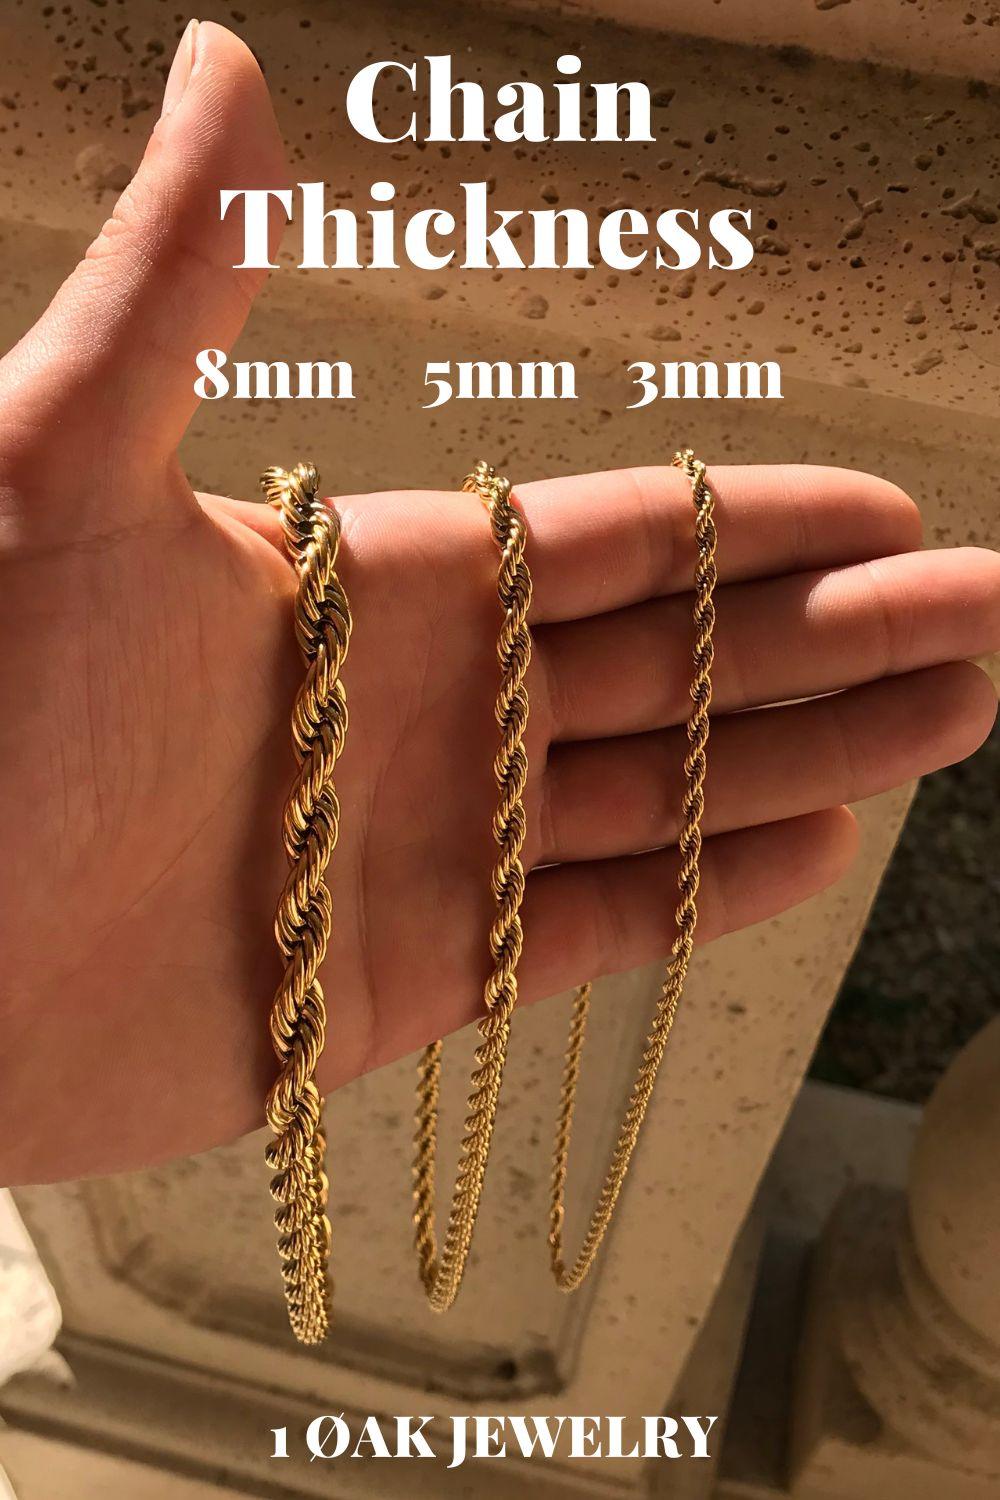 rope chain thicknesses - 1 Oak Jewelry